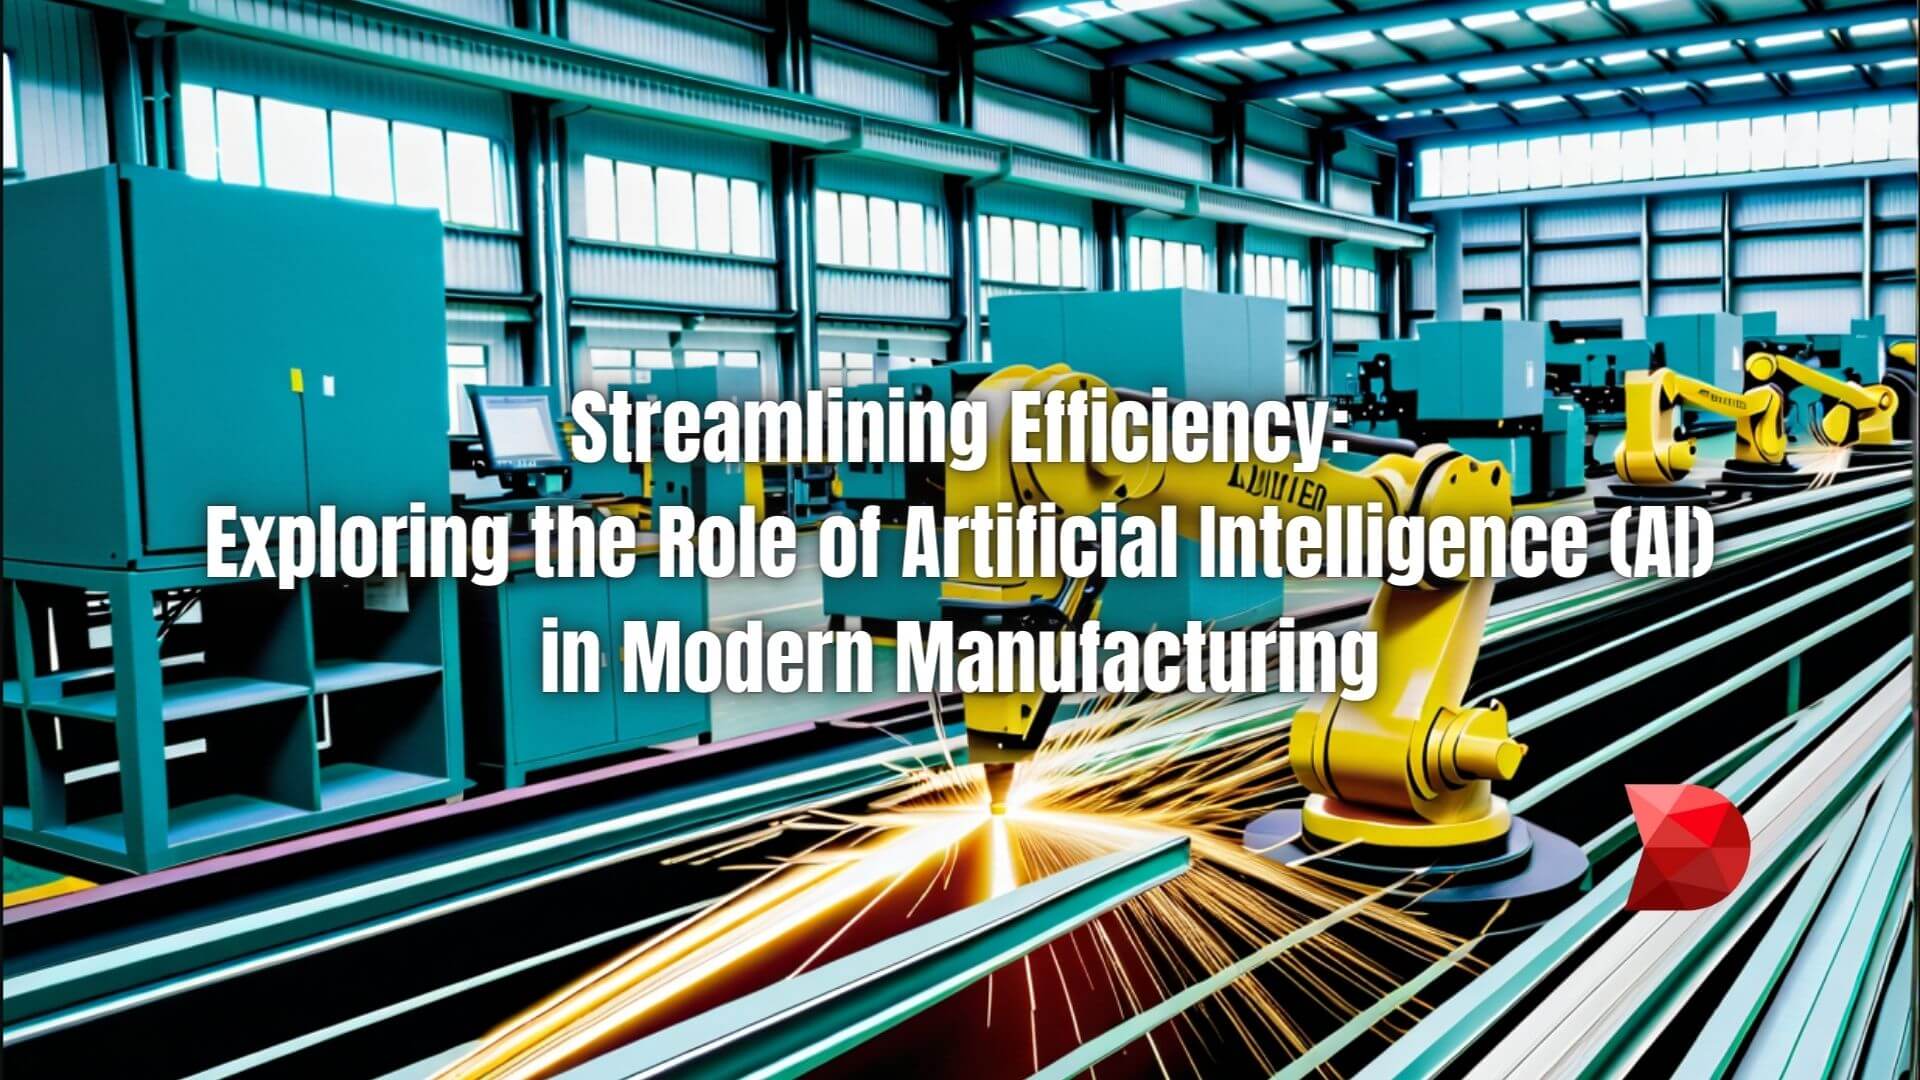 In the constantly evolving manufacturing landscape, adopting AI and low-code platforms is the present reality. Click here to learn more!